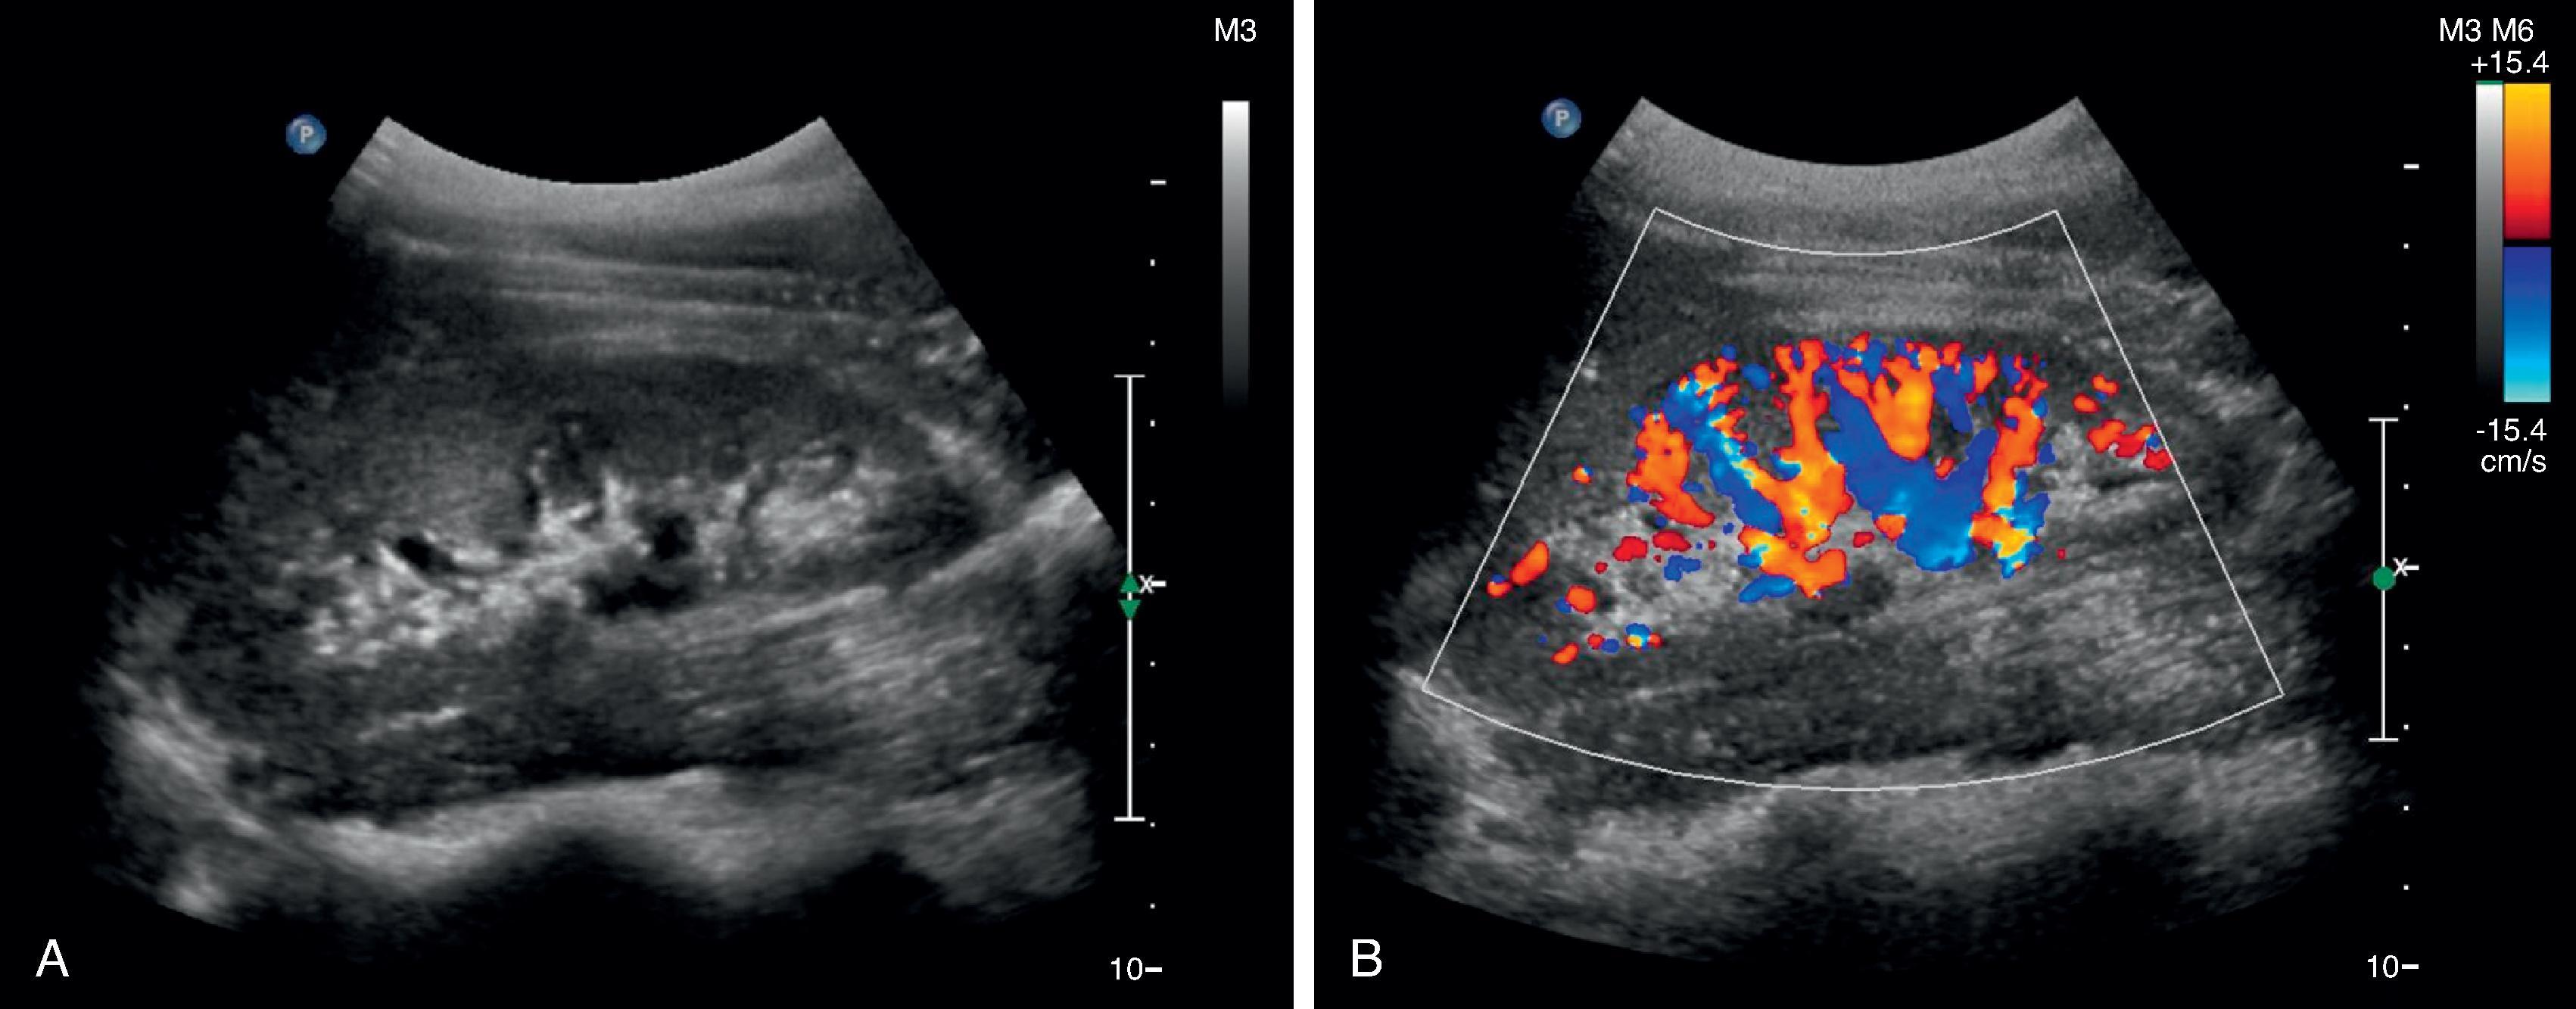 Fig. 6.5, A normal kidney imaged with ultrasound.